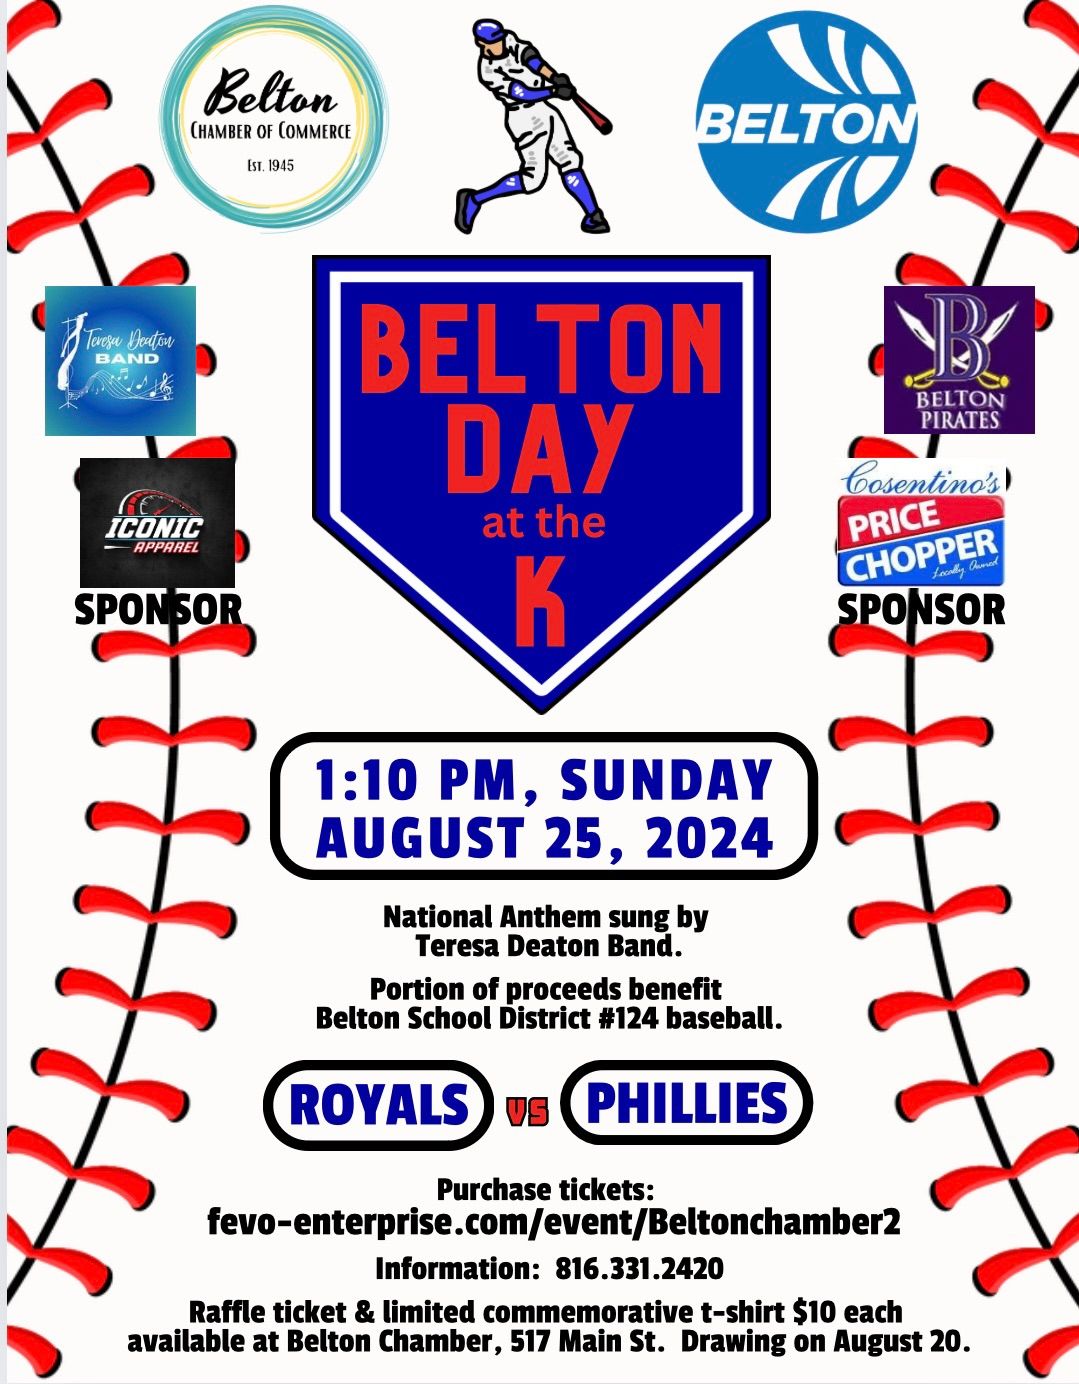 Belton Day at the K